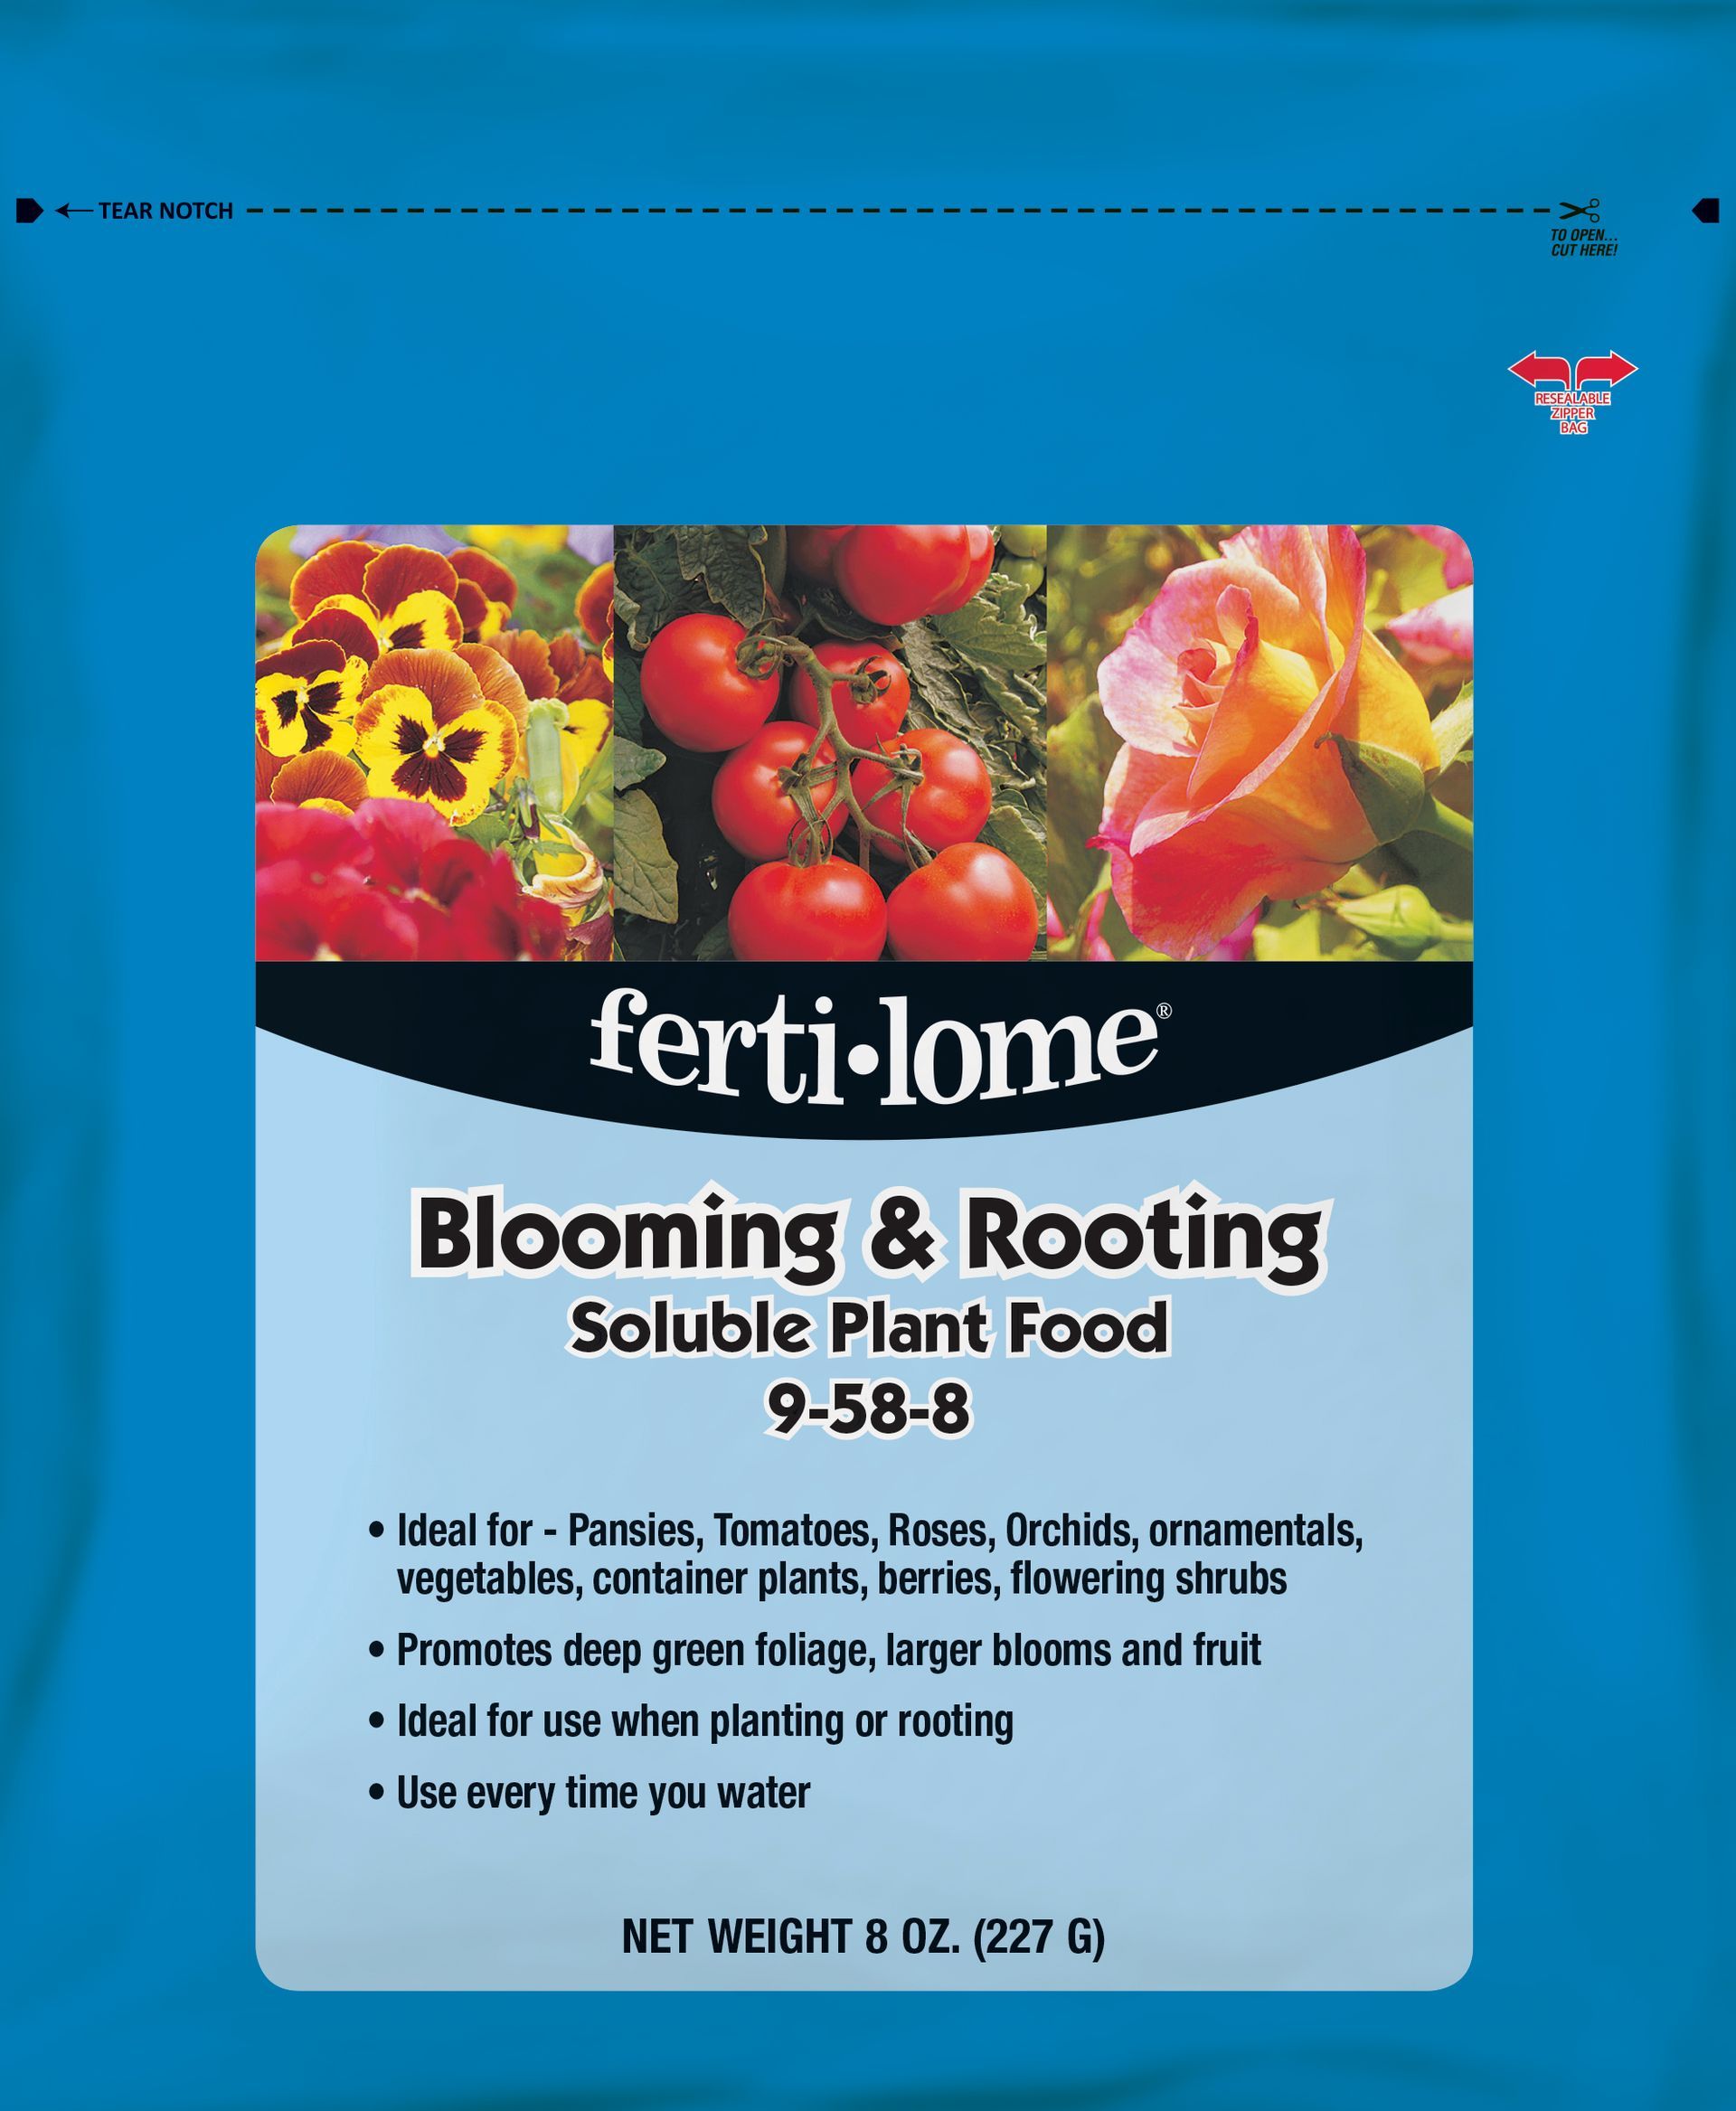 Ferti-lome Blooming & Rooting Soluble Plant Food helps promote deep green foliage, fruit, and blooms.